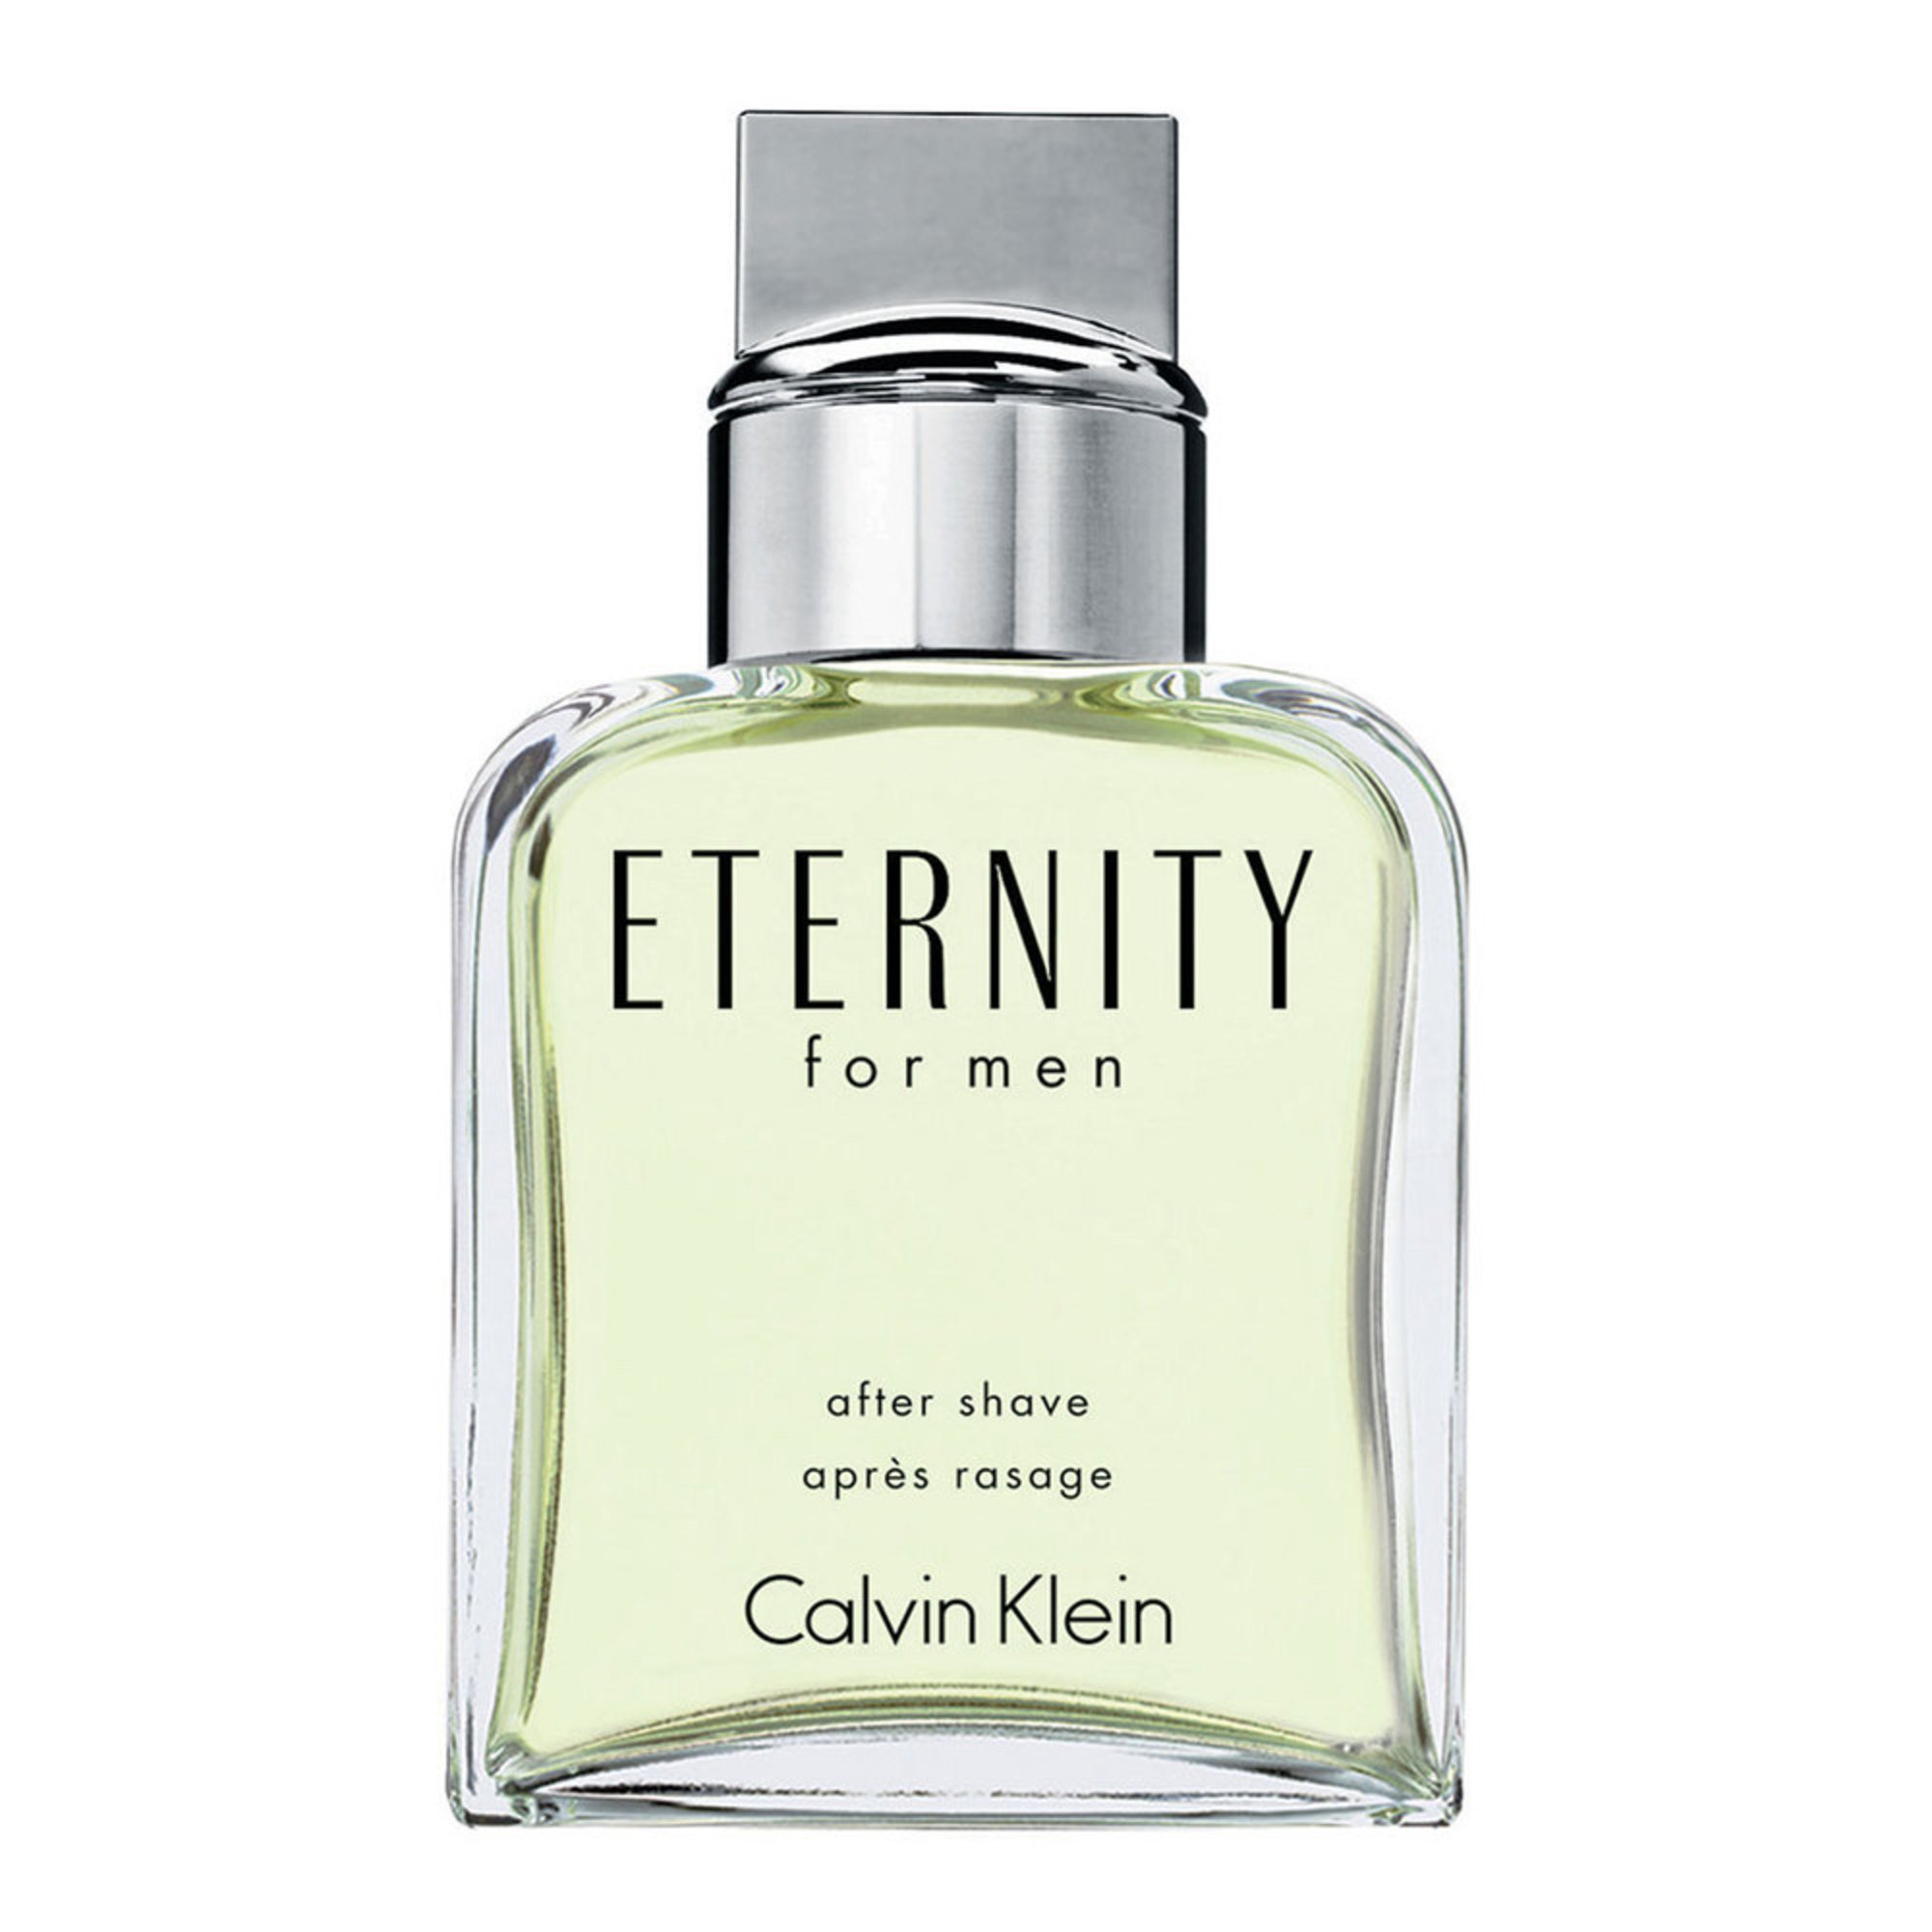 Calvin Klein Eternity After Shave | Aftershave | Beauty & Personal Care ...